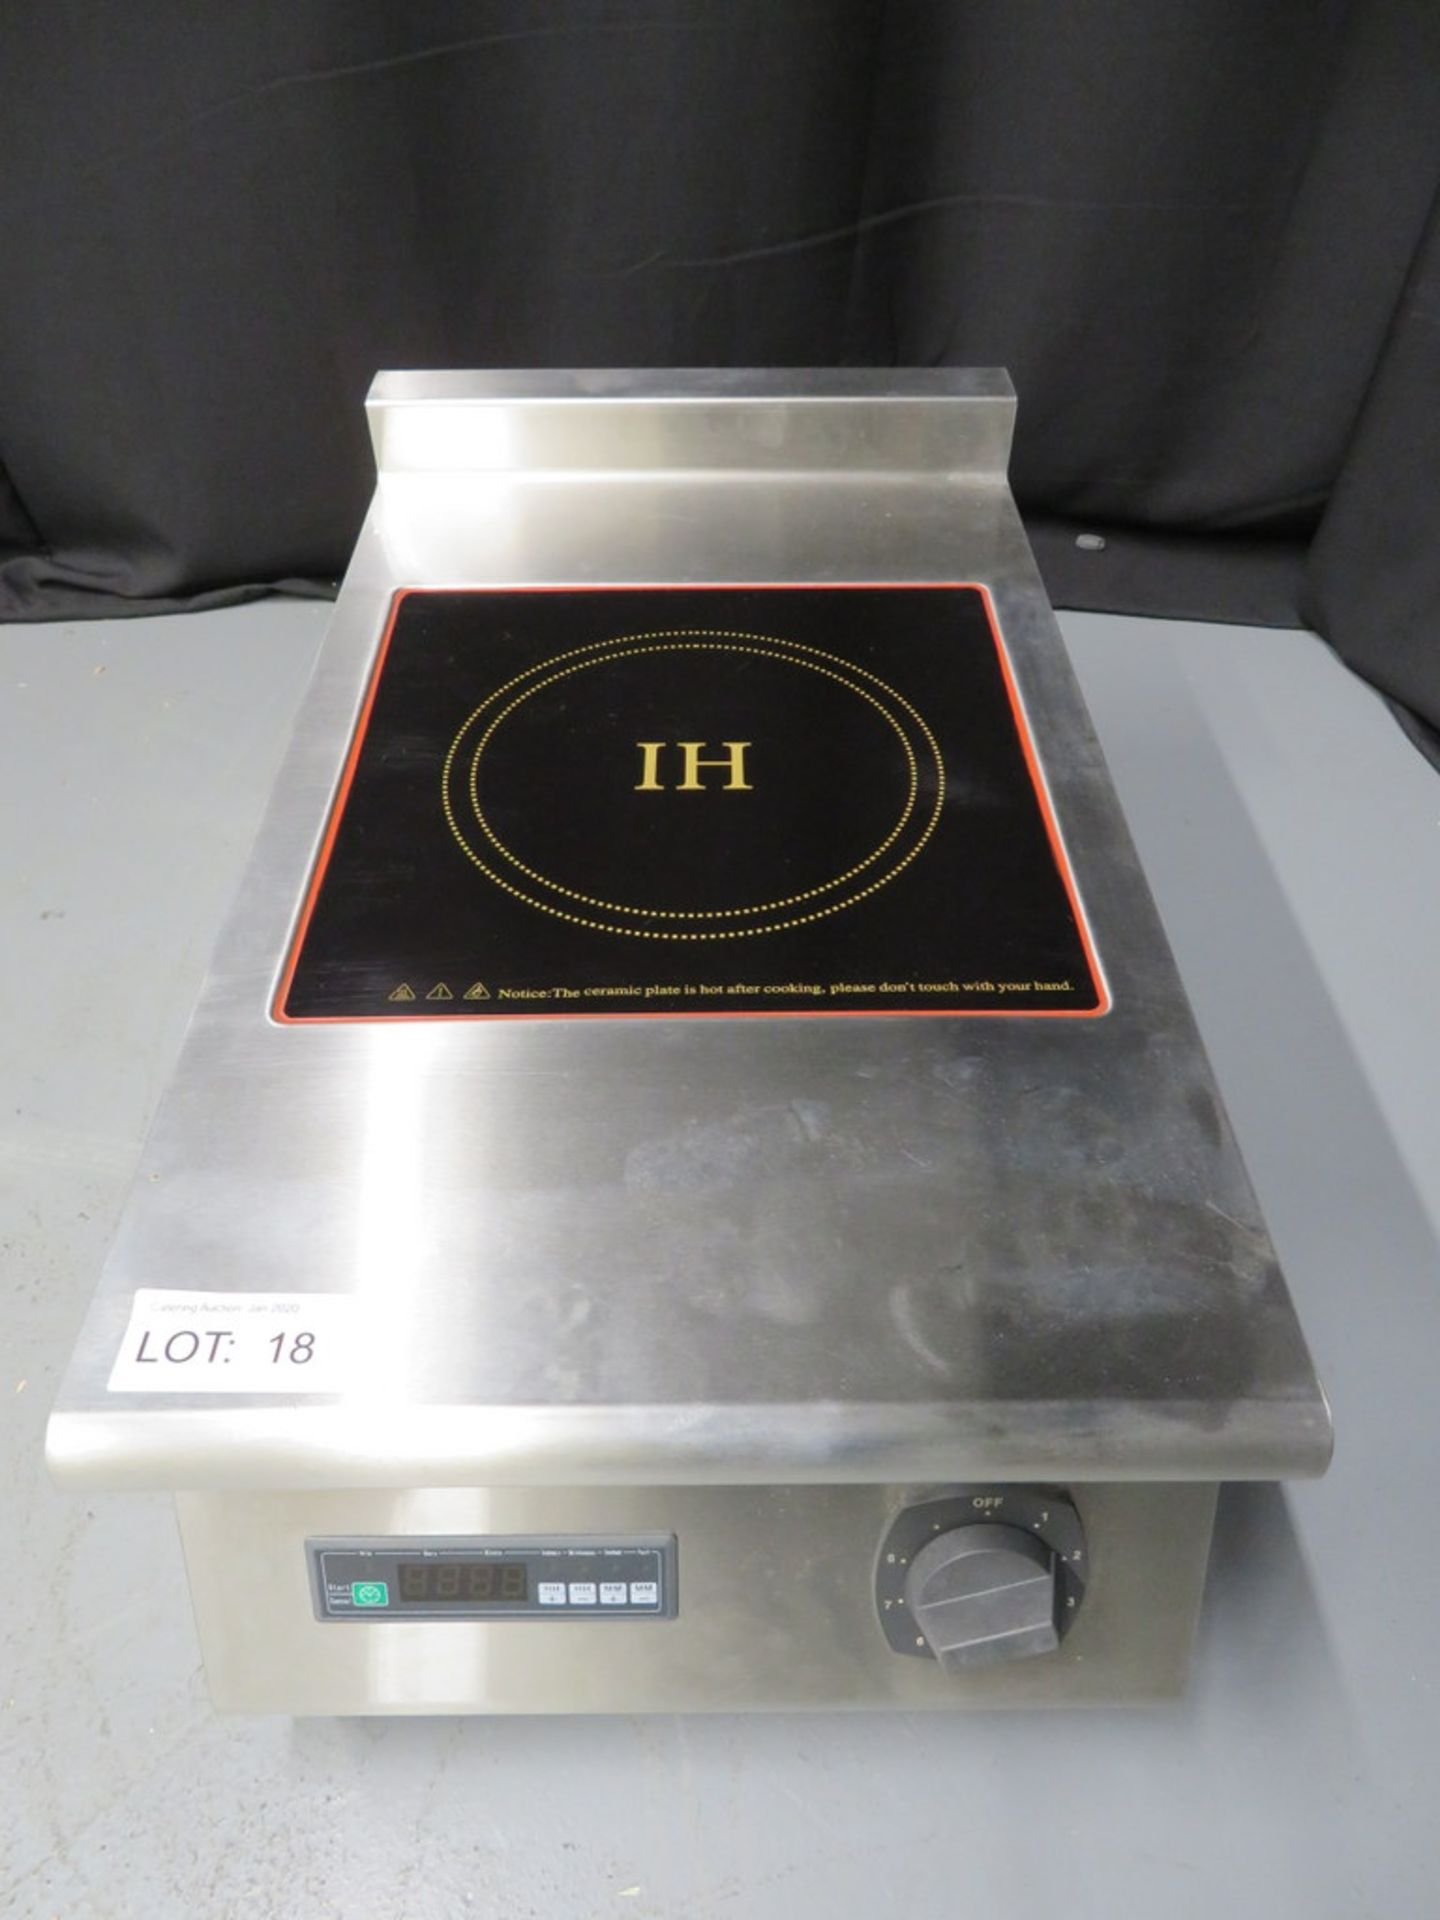 Heavy duty commercial 1 zone induction hob, 1 phase electric, new